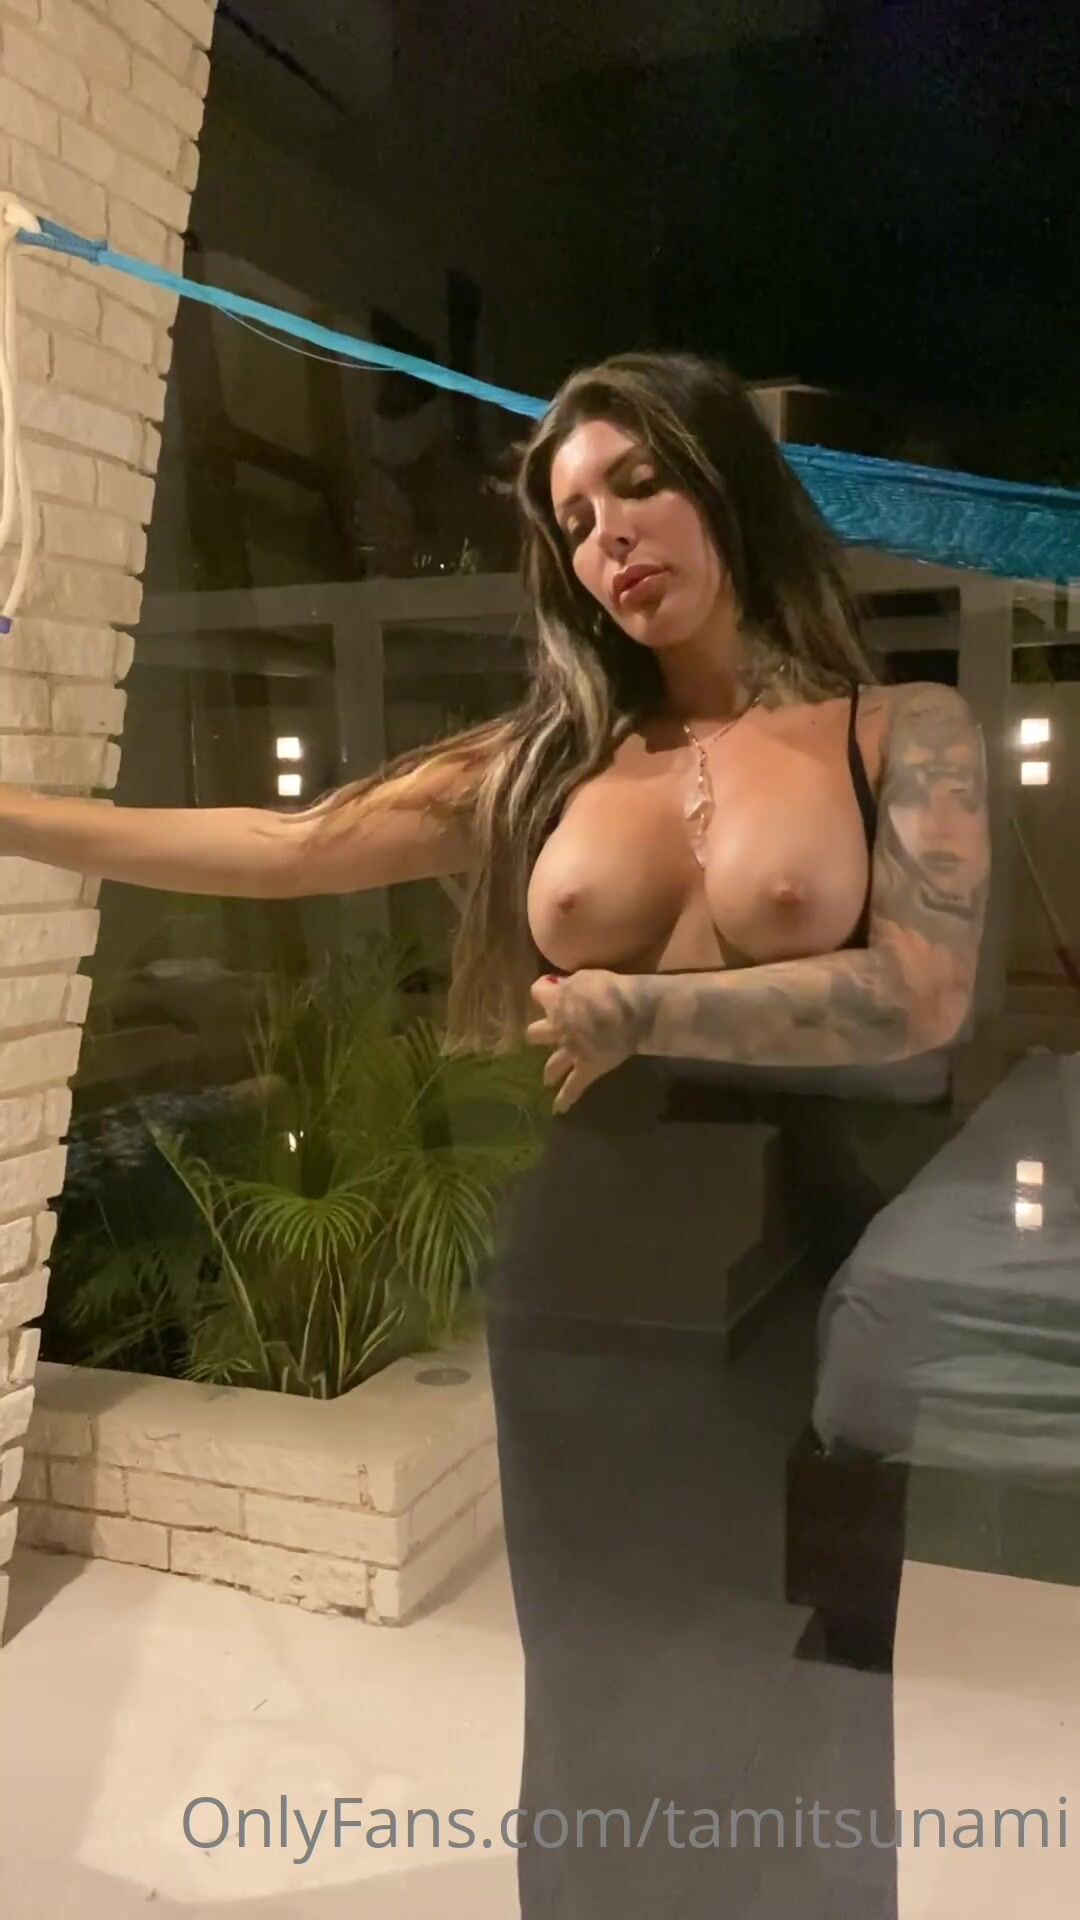 Tami Minou undressing in front of glass